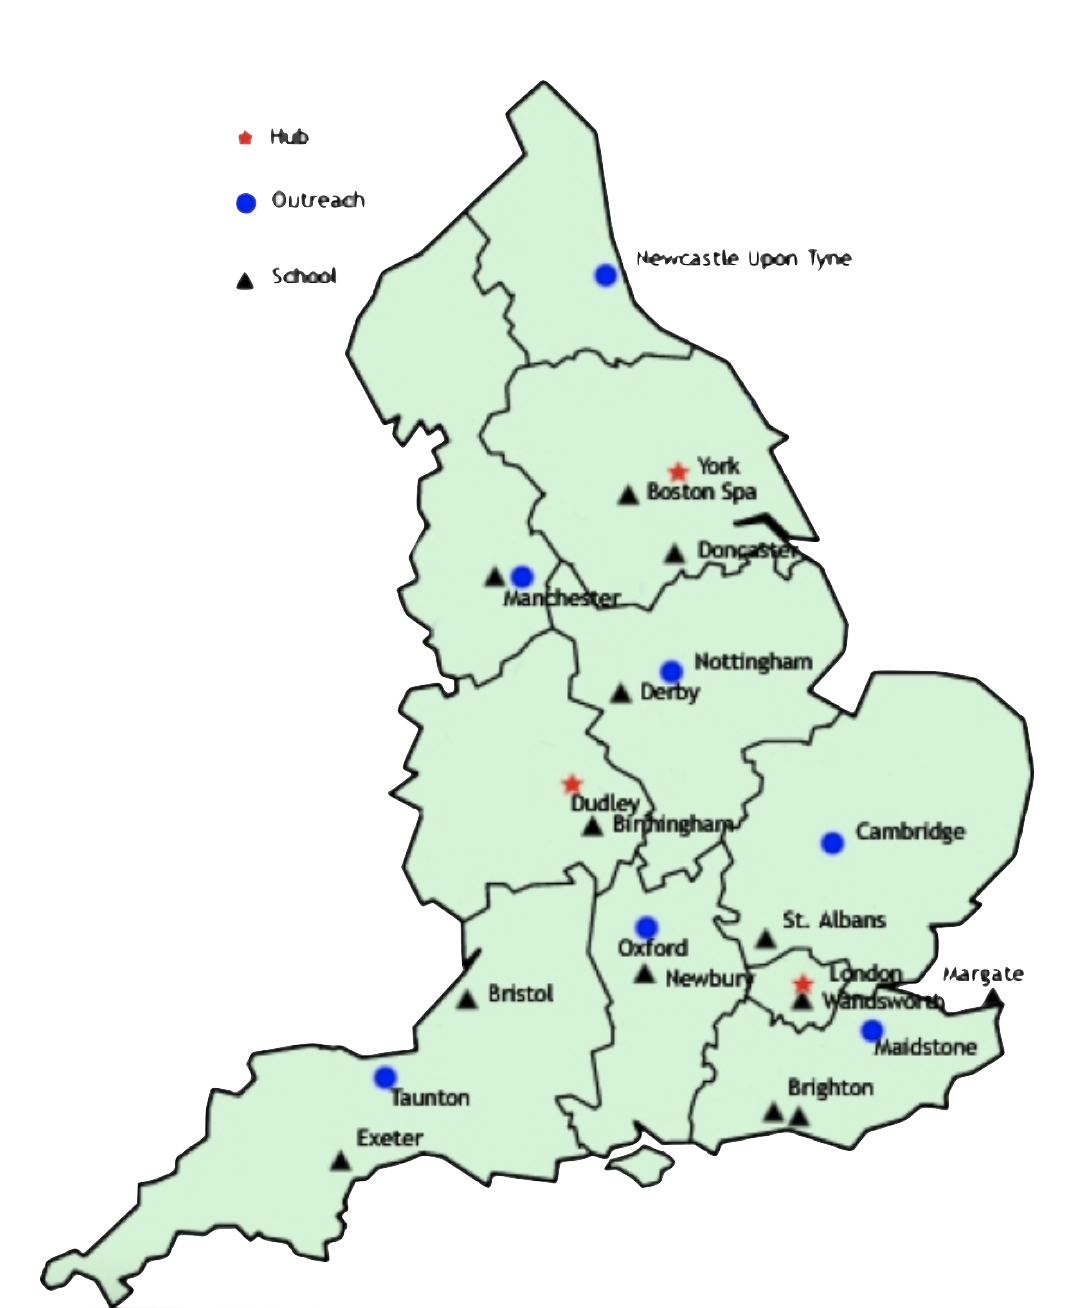 Map of Deaf CAMHS services across the UK